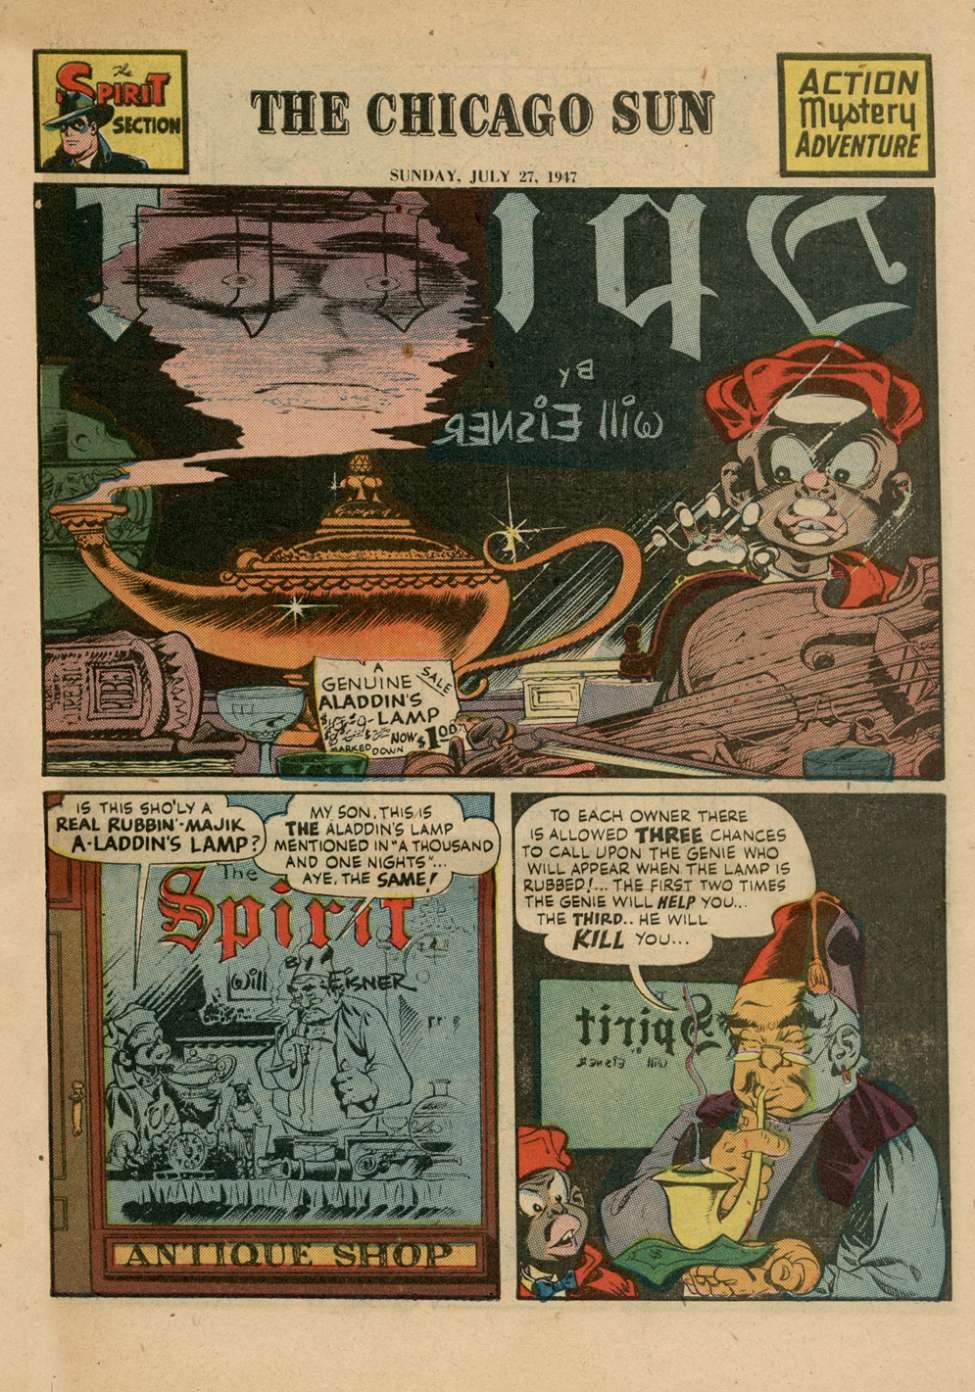 Comic Book Cover For The Spirit (1947-07-27) - Chicago Sun